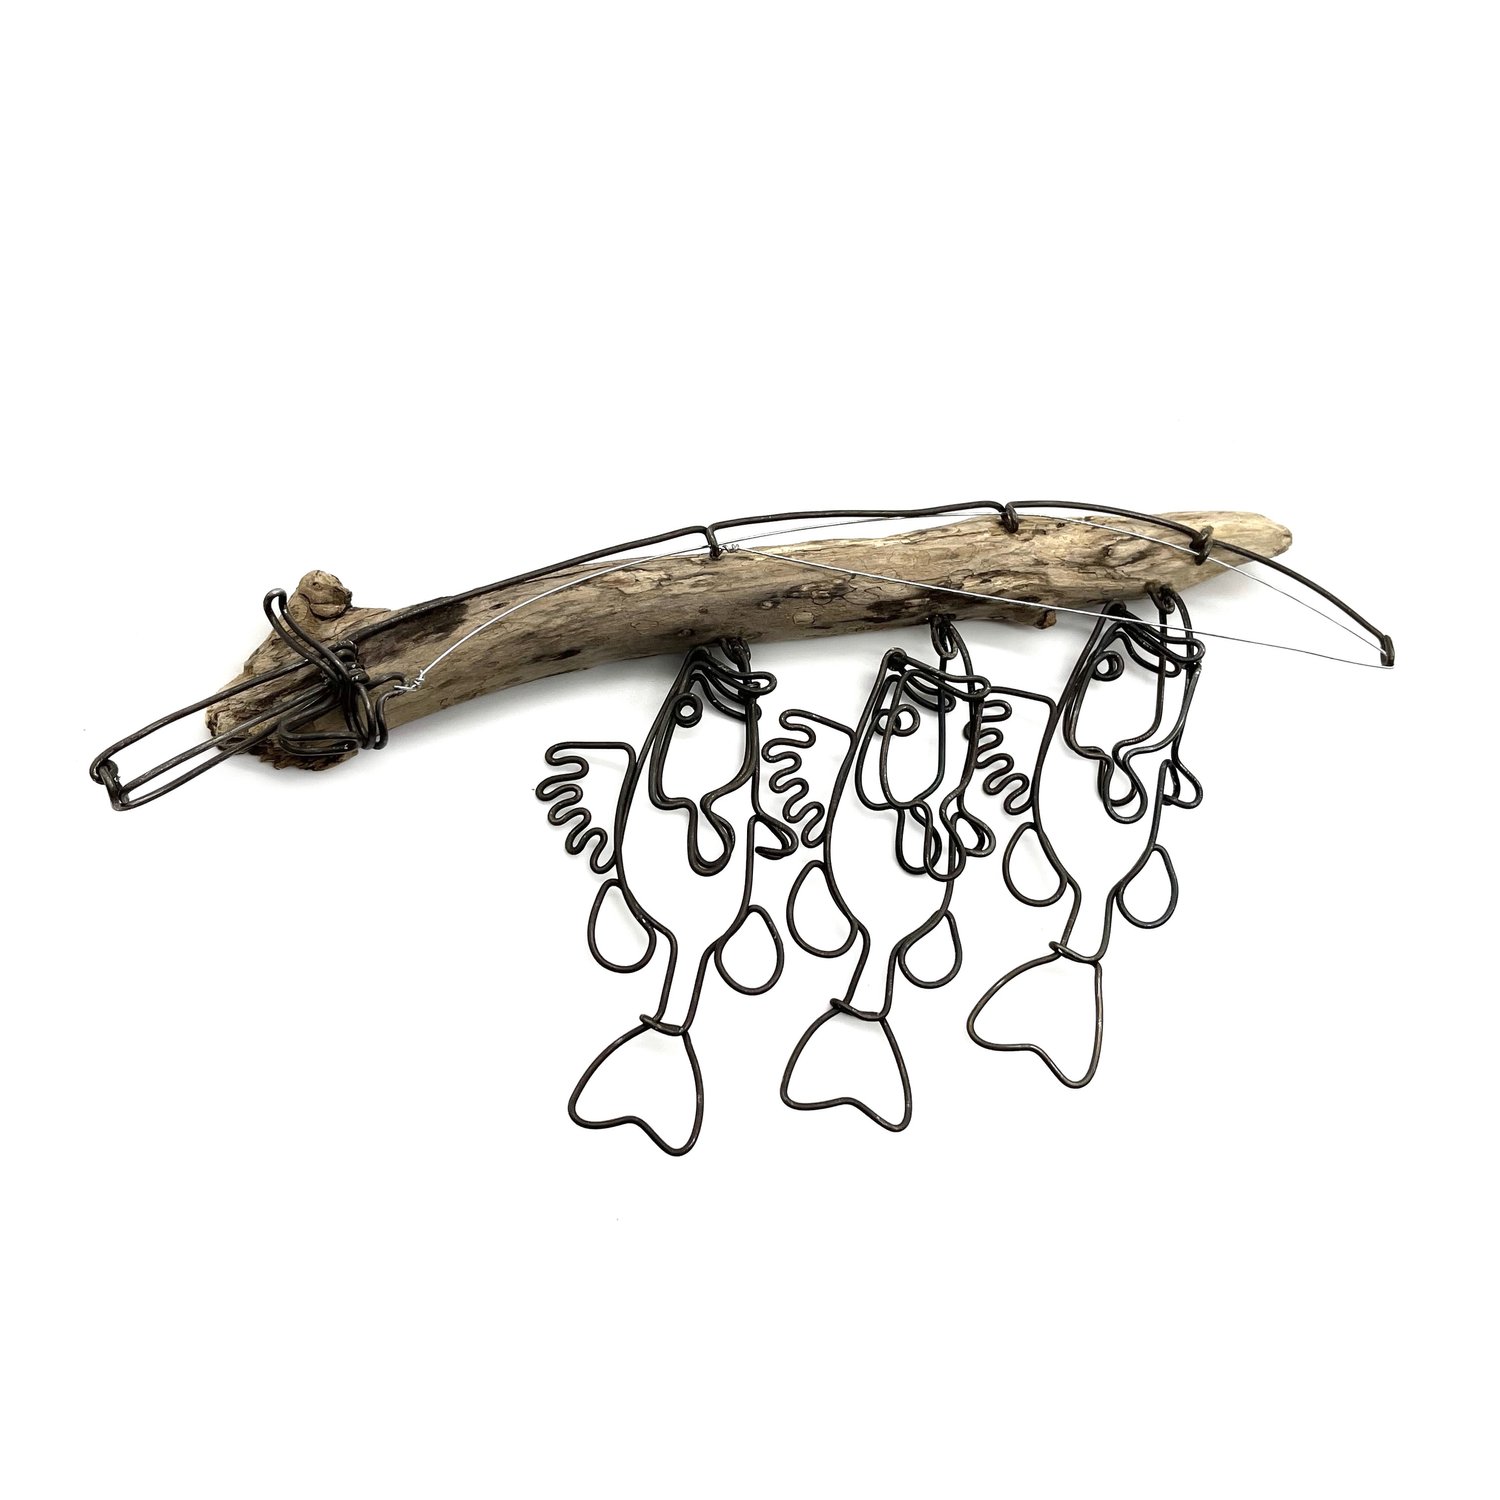 Bass Stringer Wire Sculpture, Stringer with Fishing Rod, Bass Wire Art to  Hang on the Wall, Minimal Wire Art, Perfect Gift! Free Shipping — Wired by  Bud